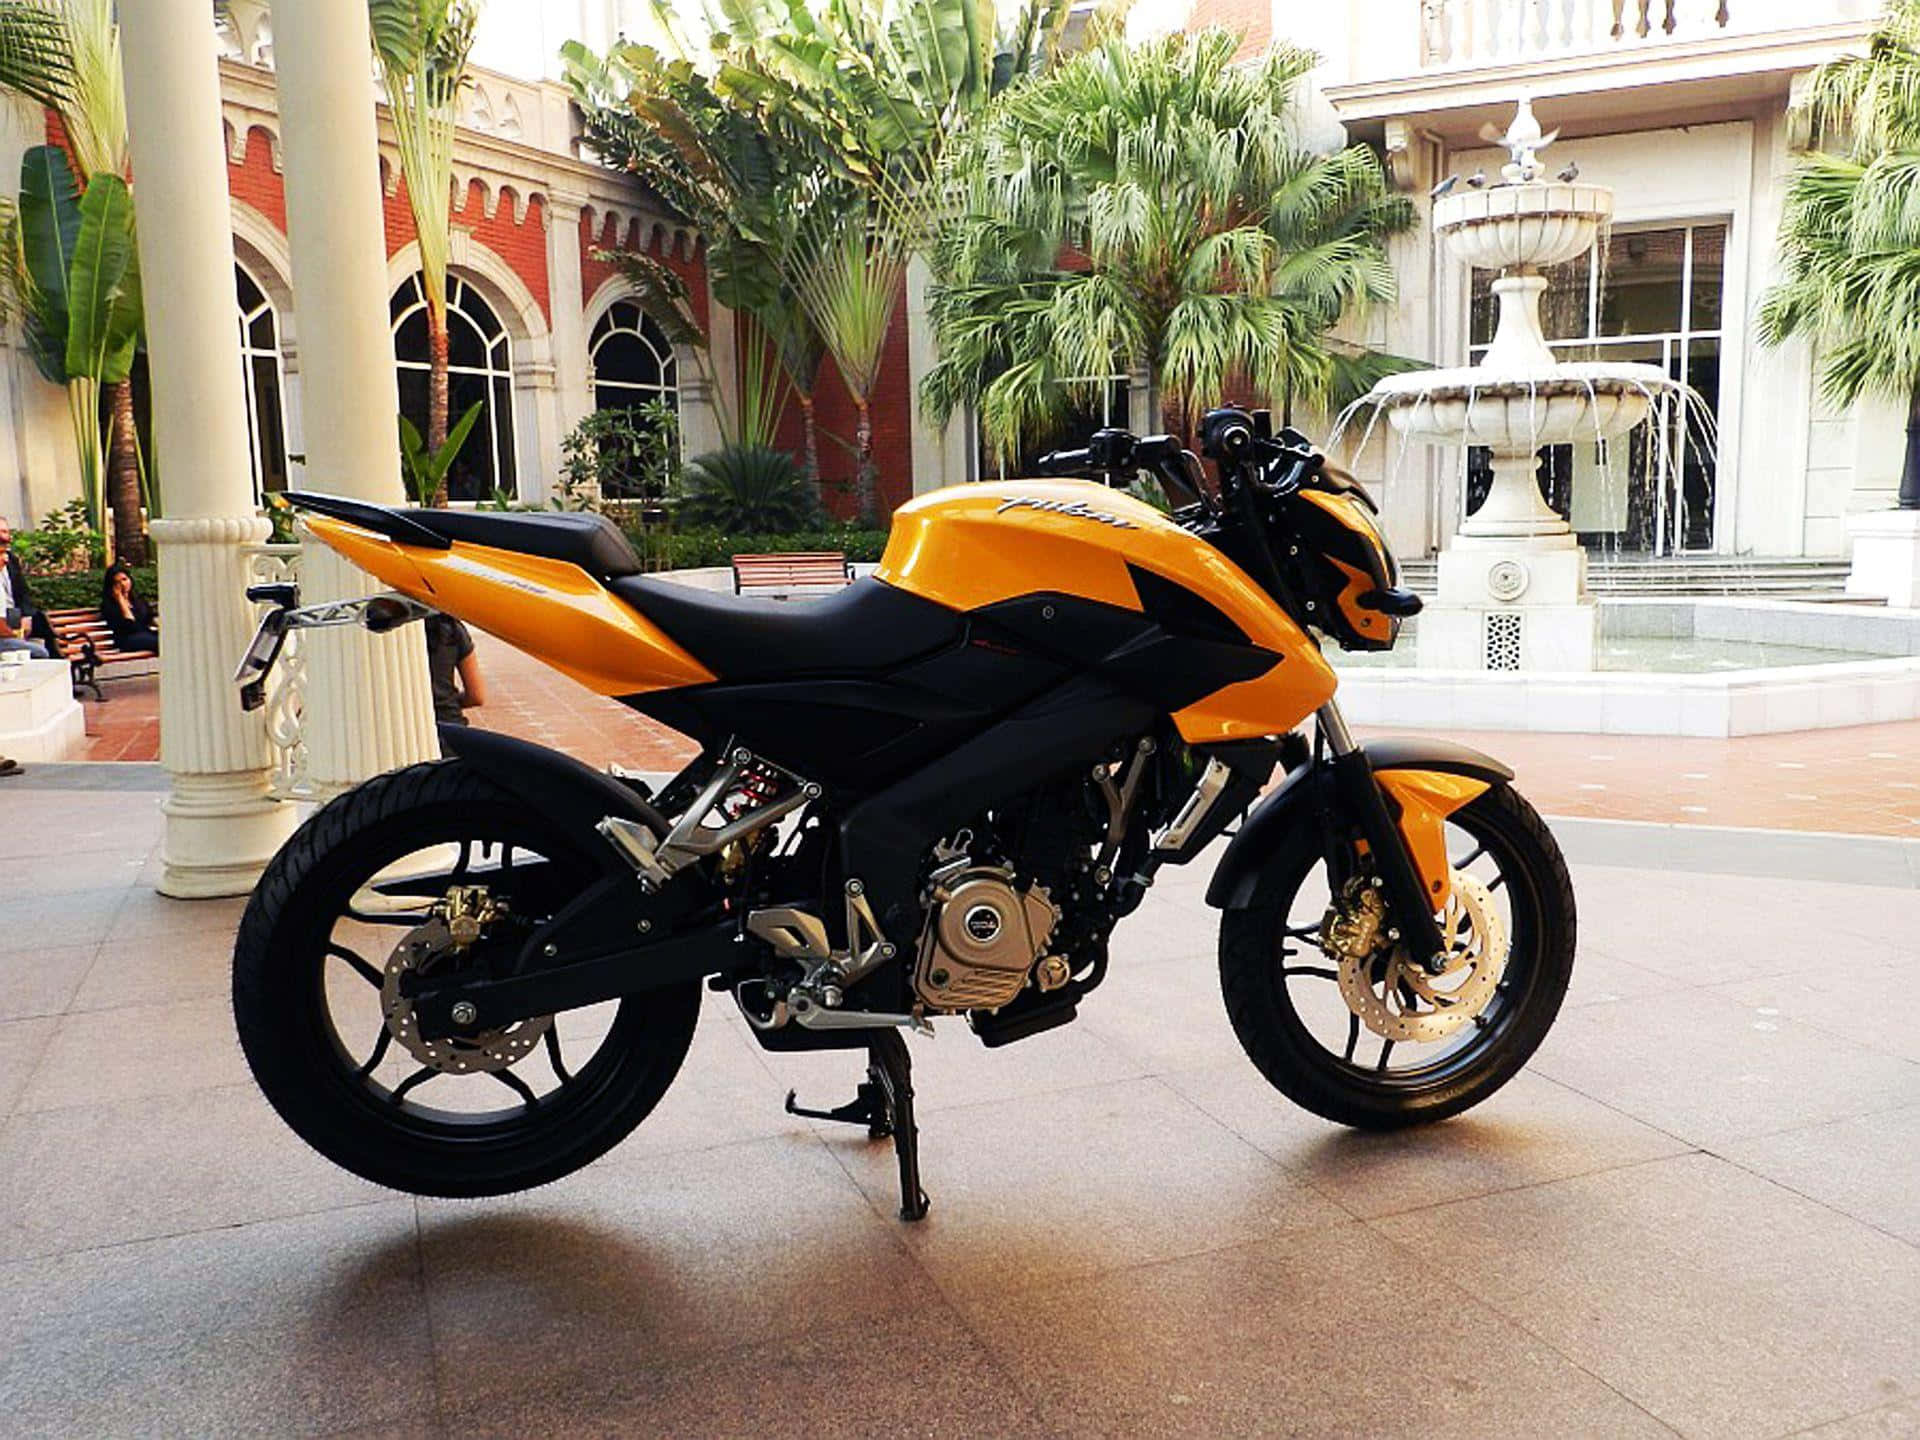 Look and Feel the Power of the Bajaj Pulsar NS 200